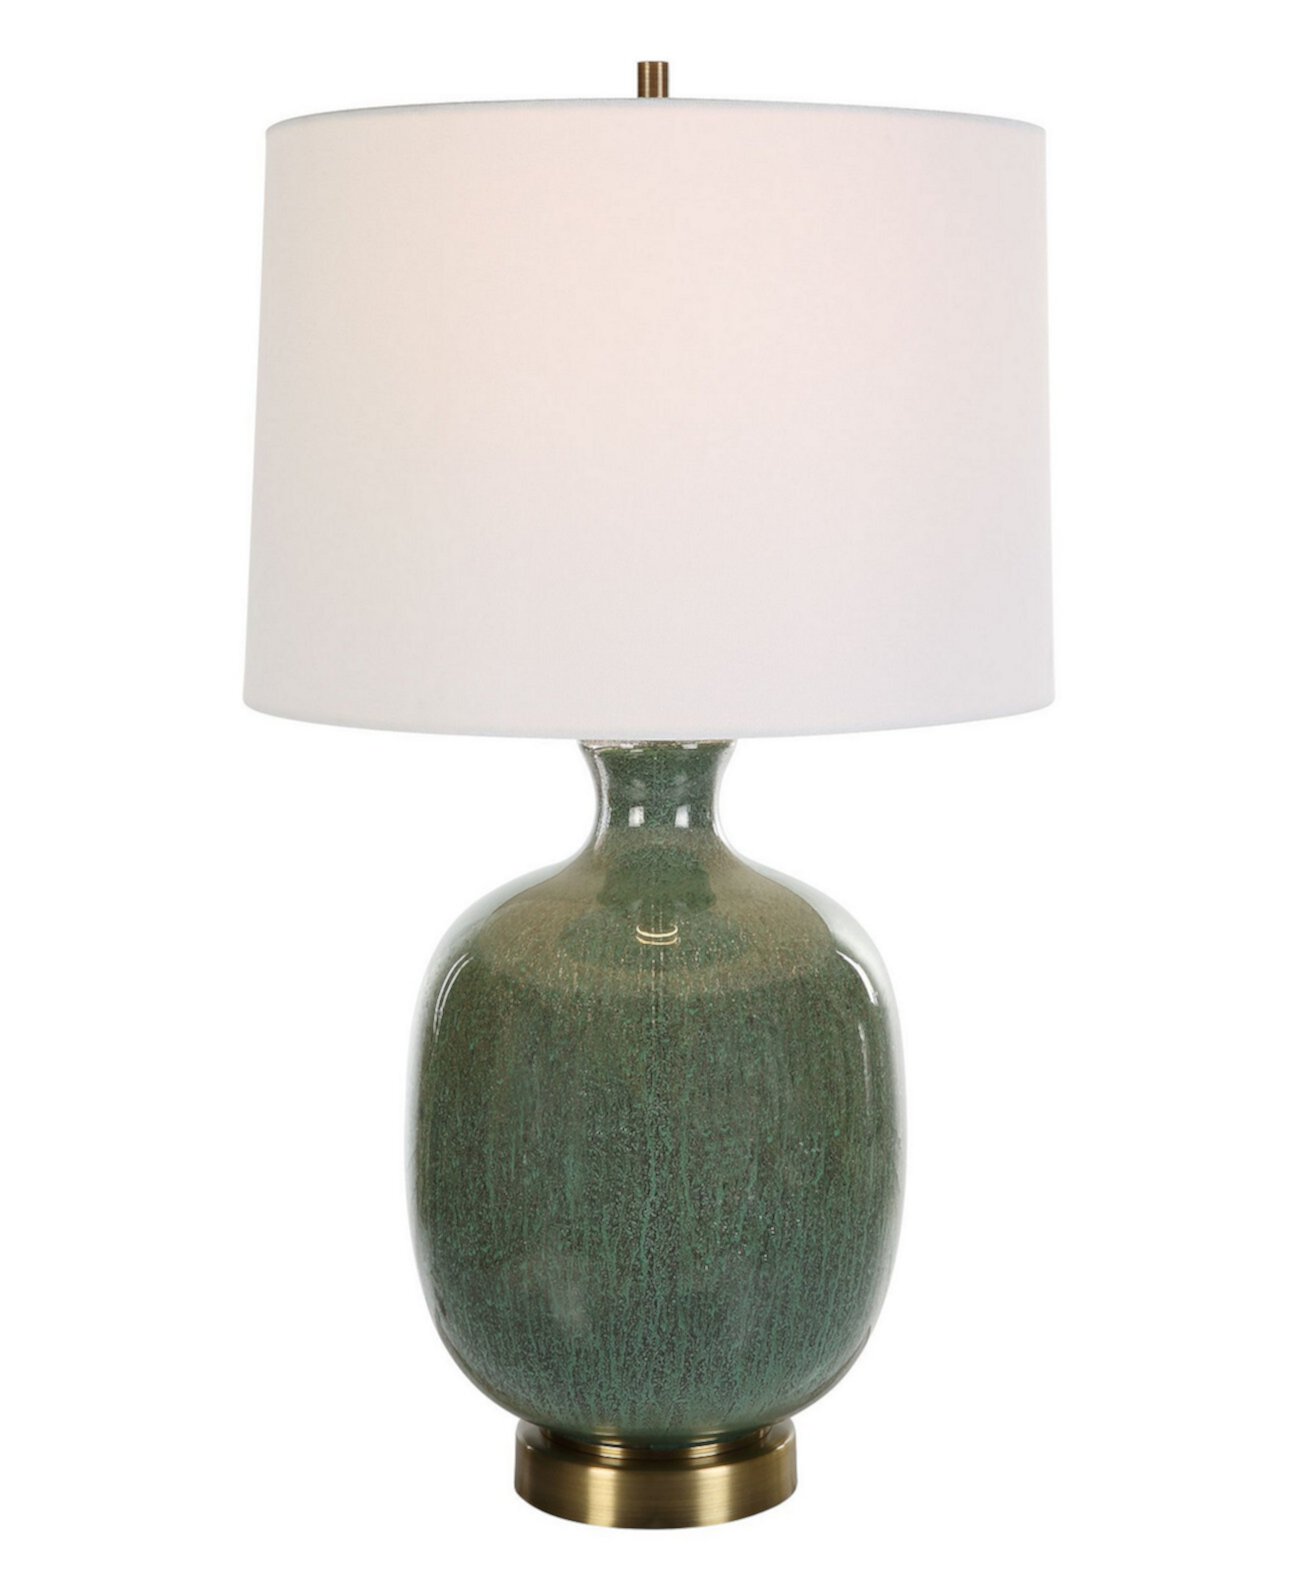 26" Nataly Table Lamp Uttermost